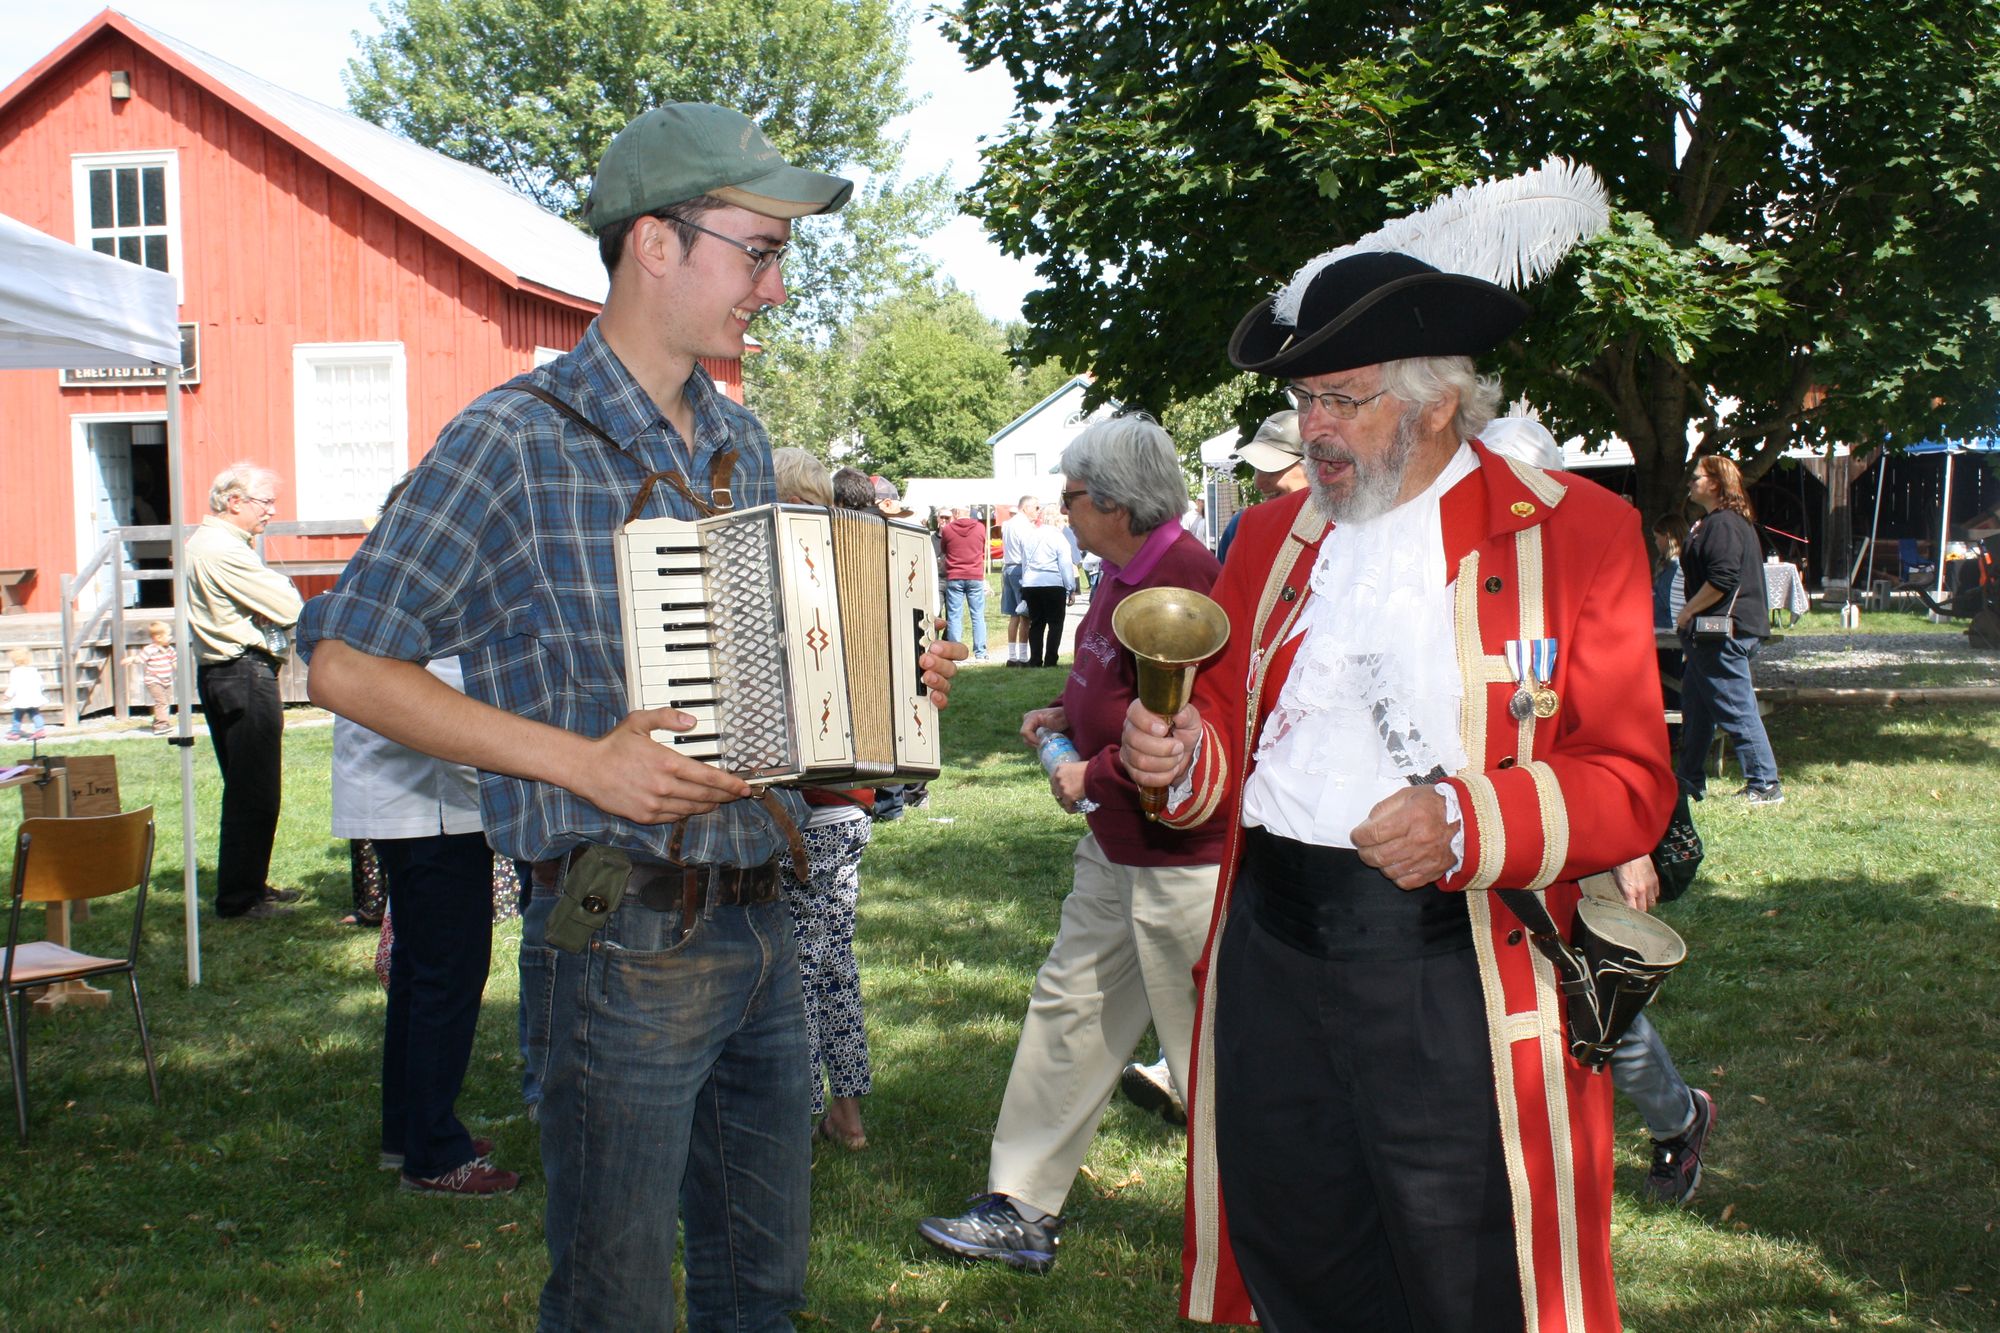 Old-fashioned fun is sure to delight this Sunday at the Harvest Festival des récoltes at the Glengarry Pioneer Museum, September 8